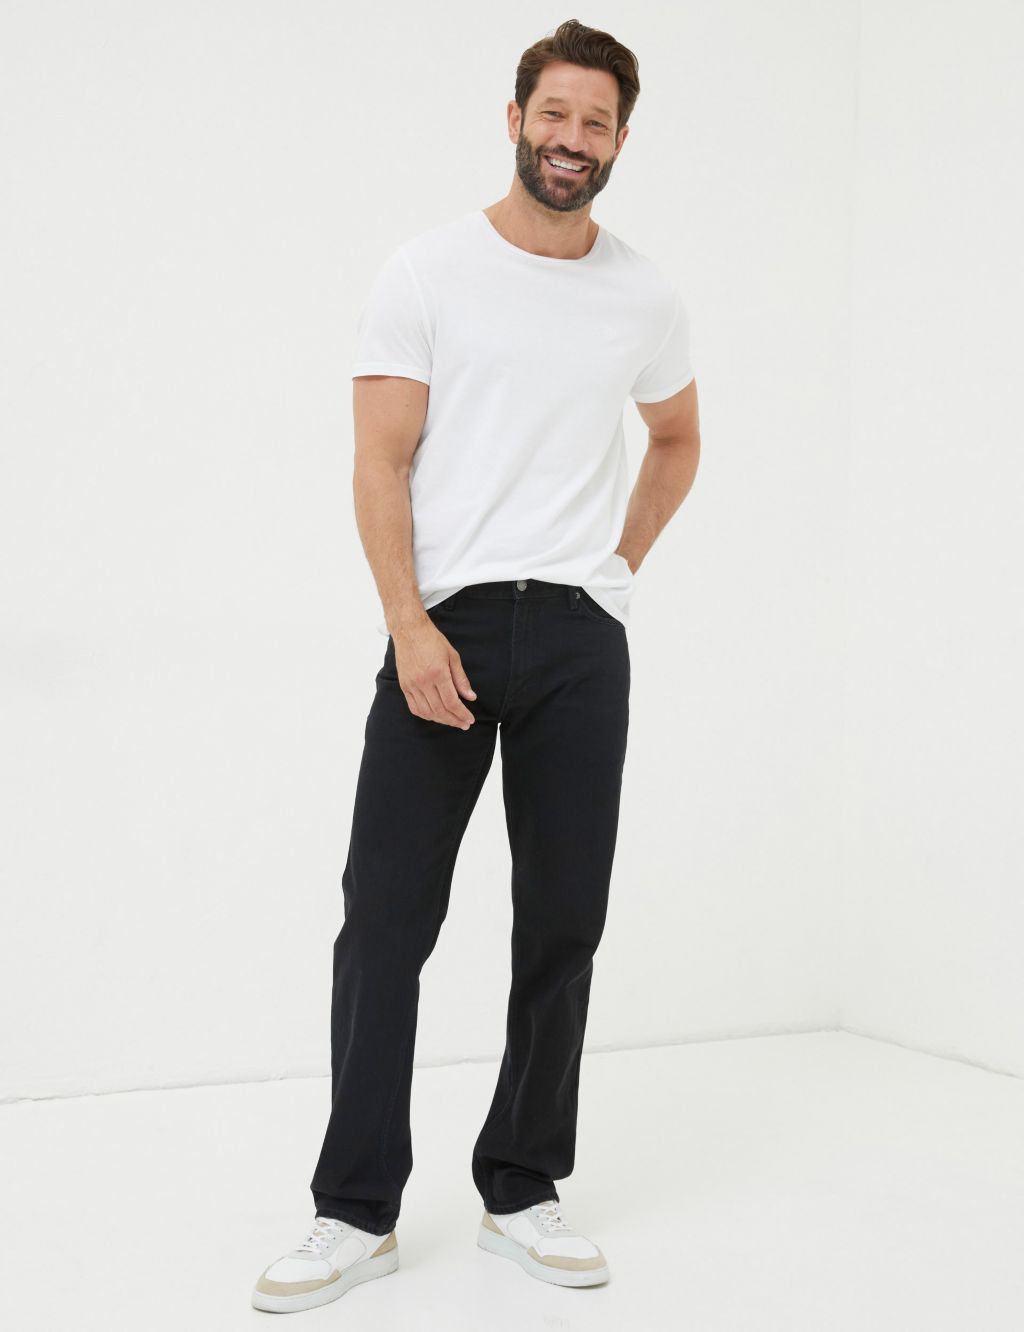 Straight Fit Pure Cotton 5 Pocket Jeans image 1